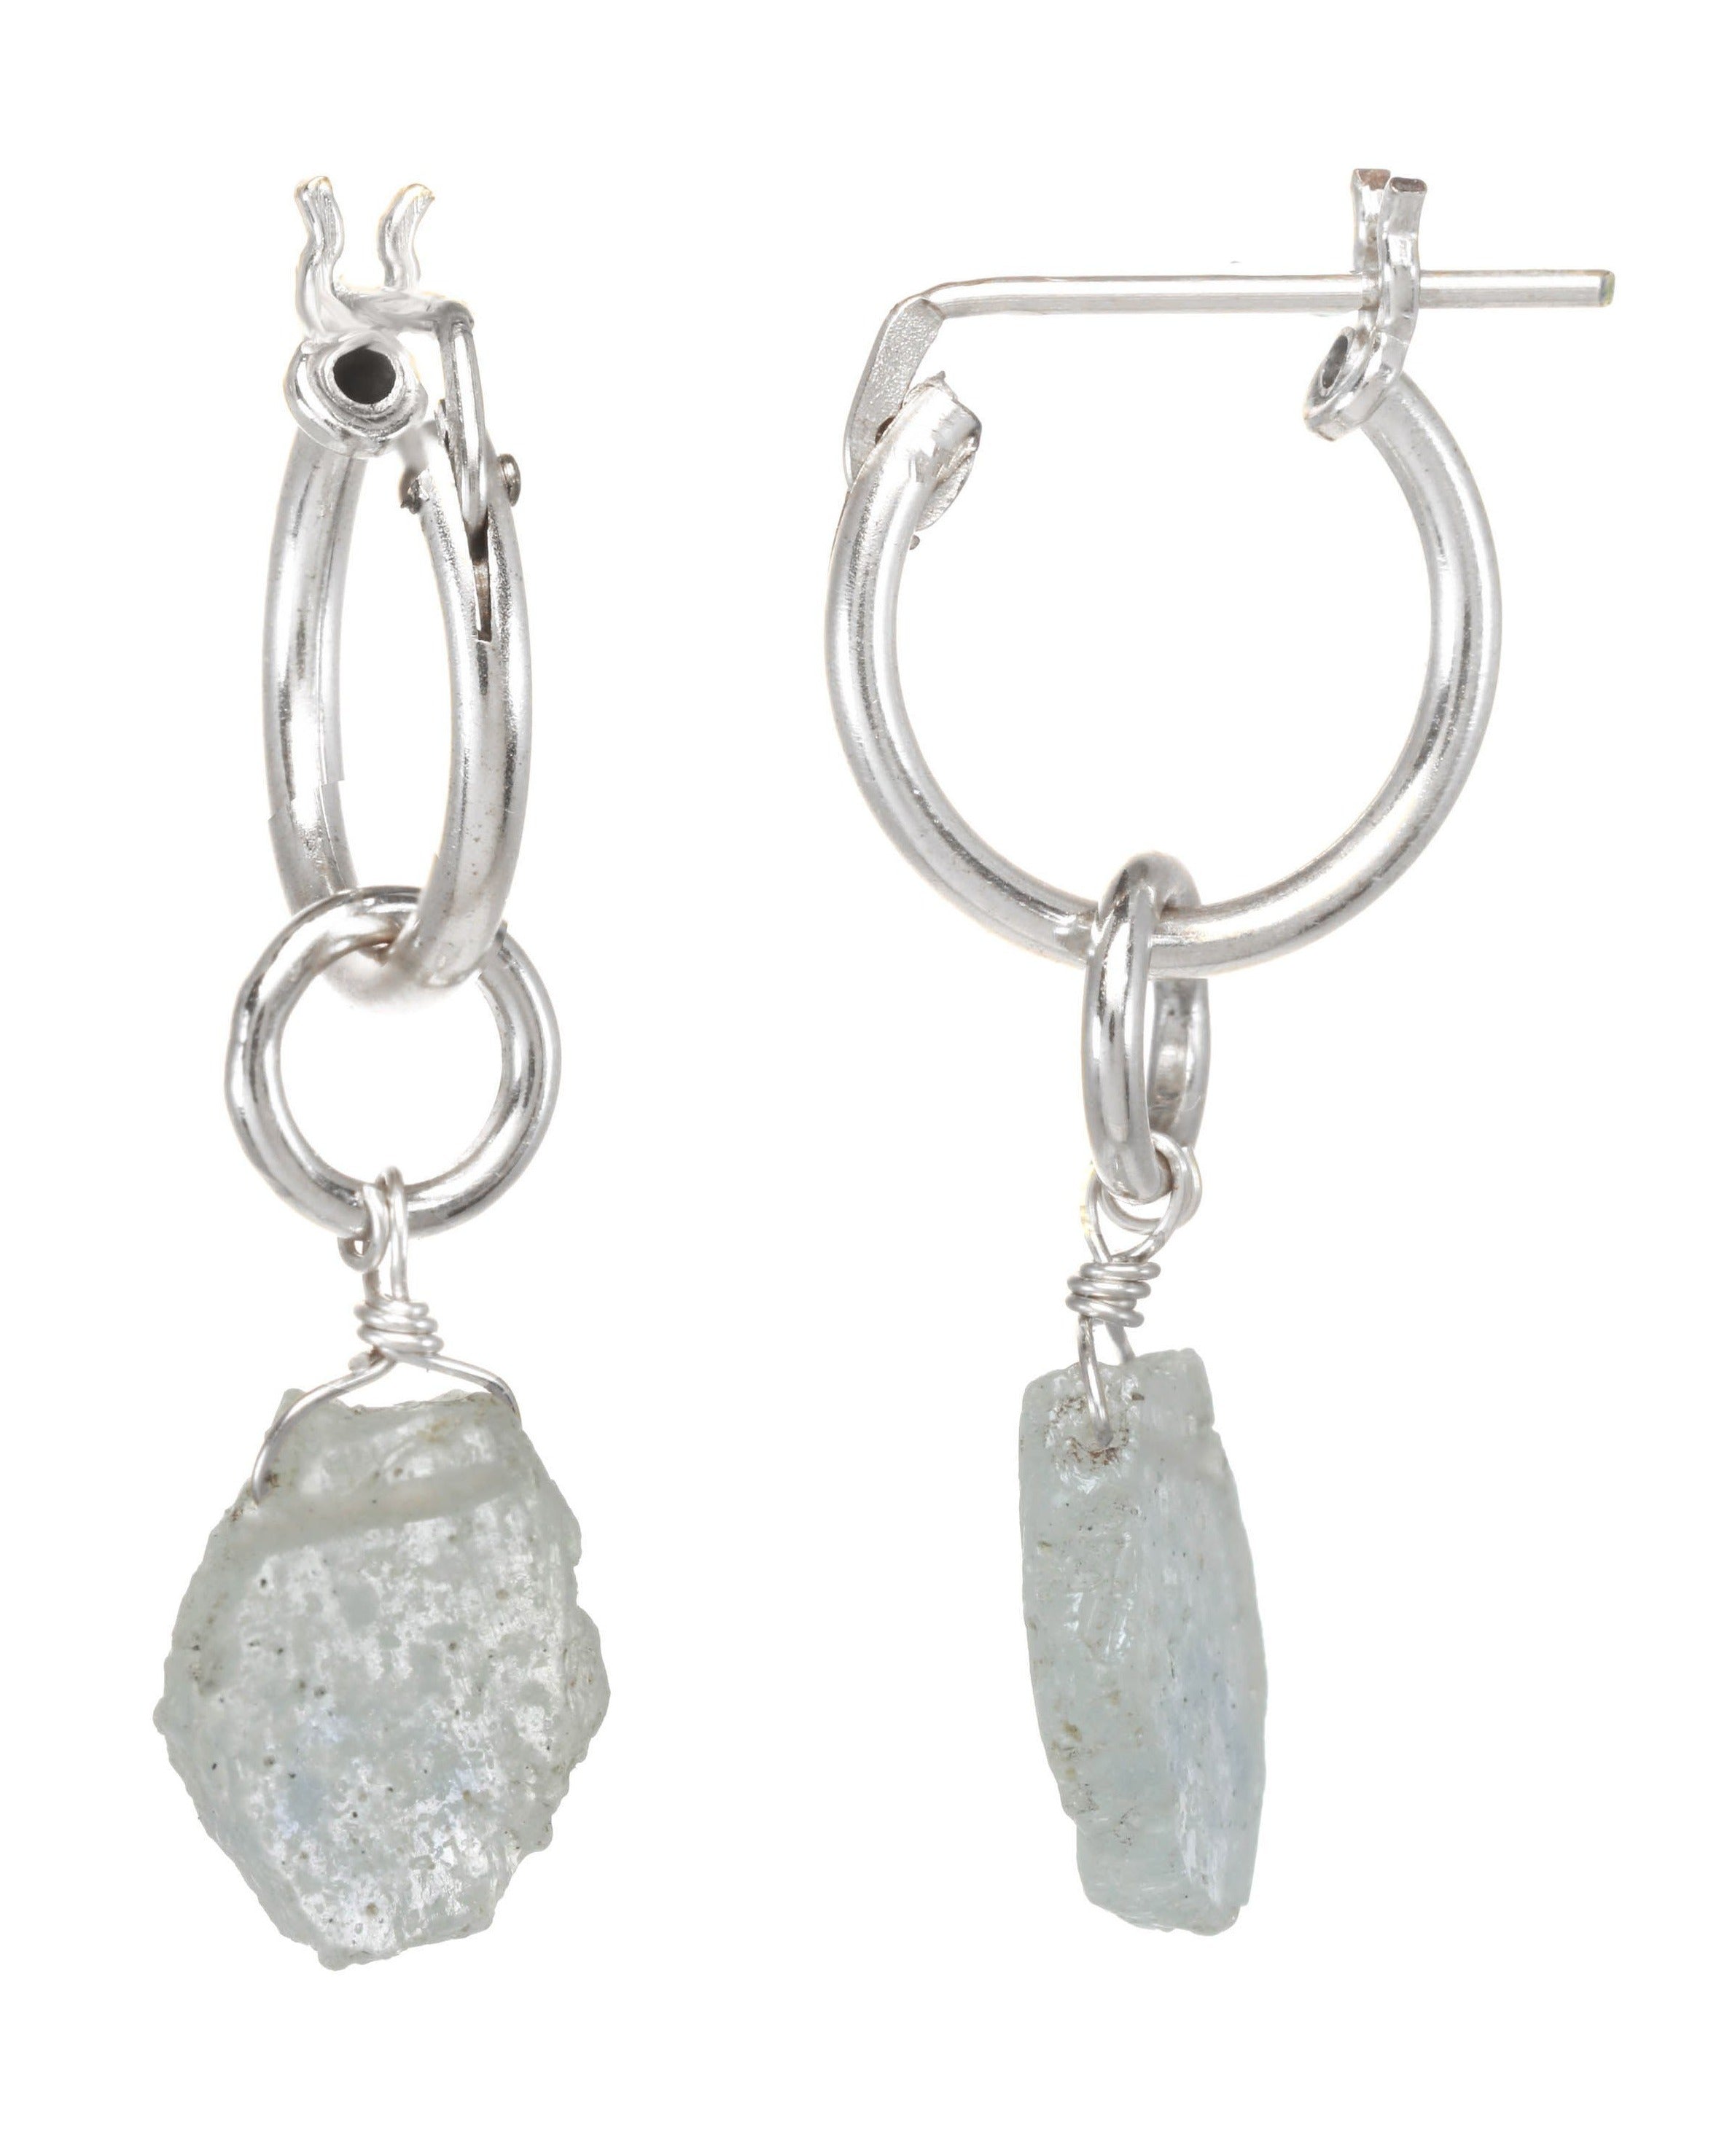 Sugar Earrings by KOZAKH. 12mm snap closure hoop earrings, with 1 inch drop length, crafted in Sterling Silver, featuring a Blue Tourmaline slice.